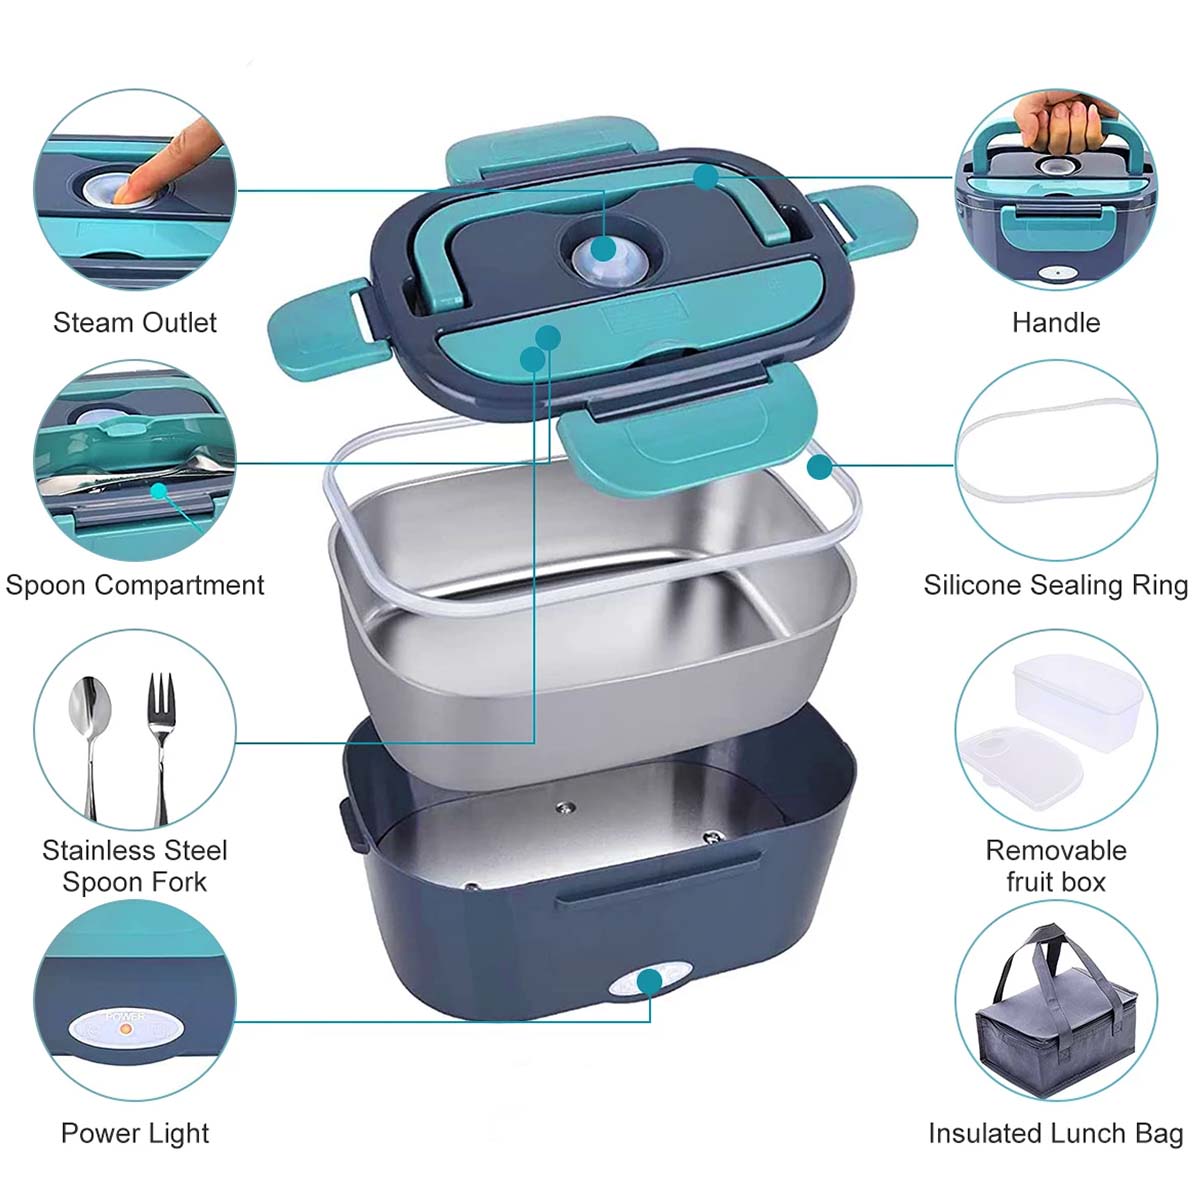 Eu Plug Electric Lunch Box, Blue Food Heater With 2 Compartments